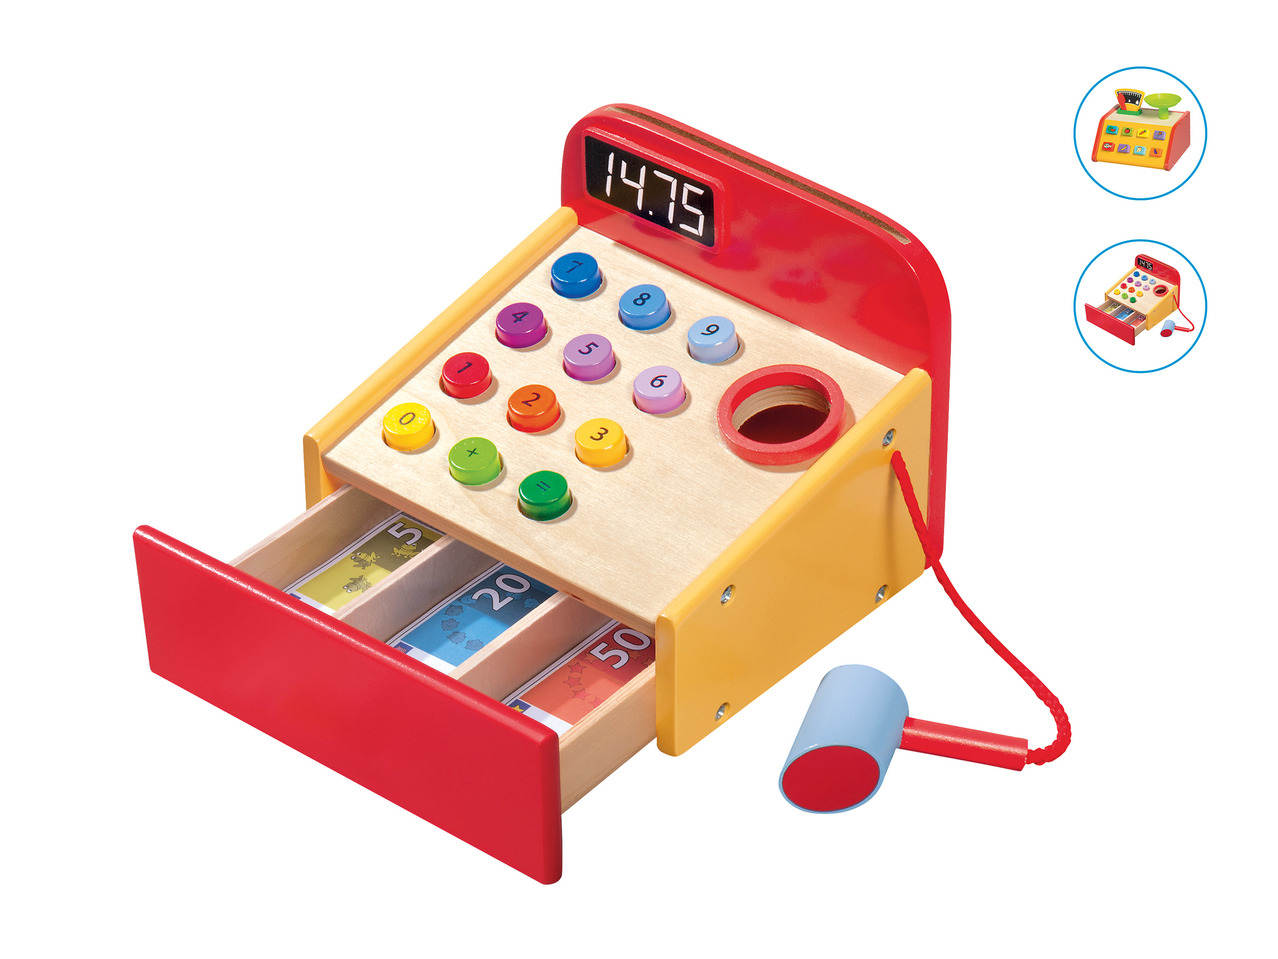 Playtive Junior Wooden Toy Scales or Till1